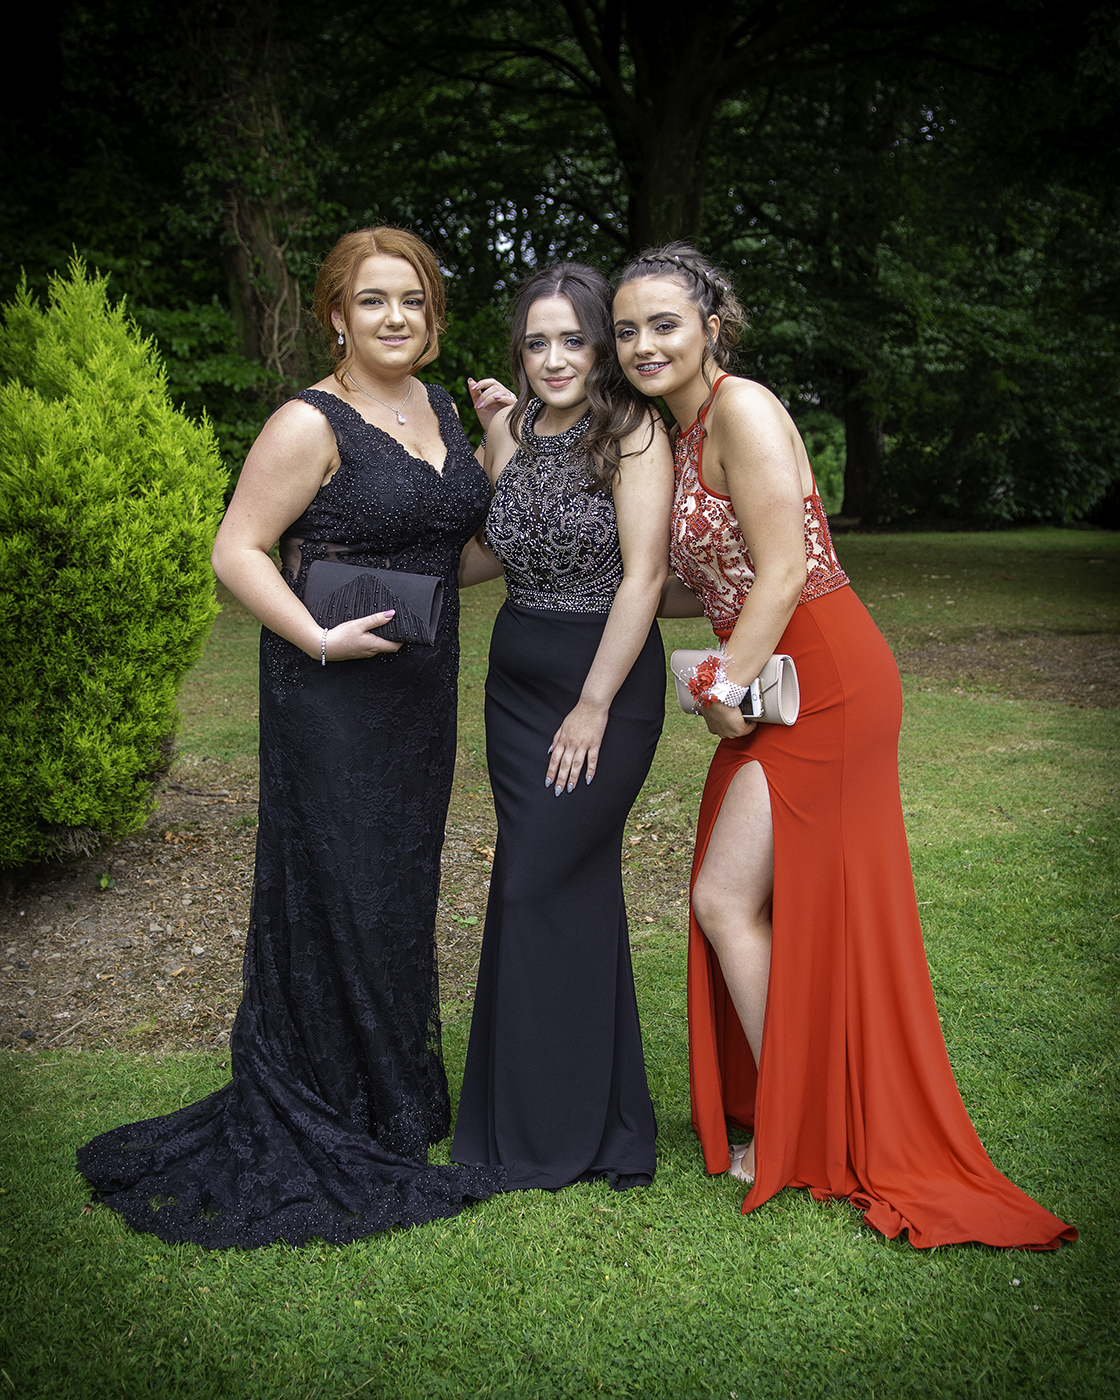 Prom photography south wales